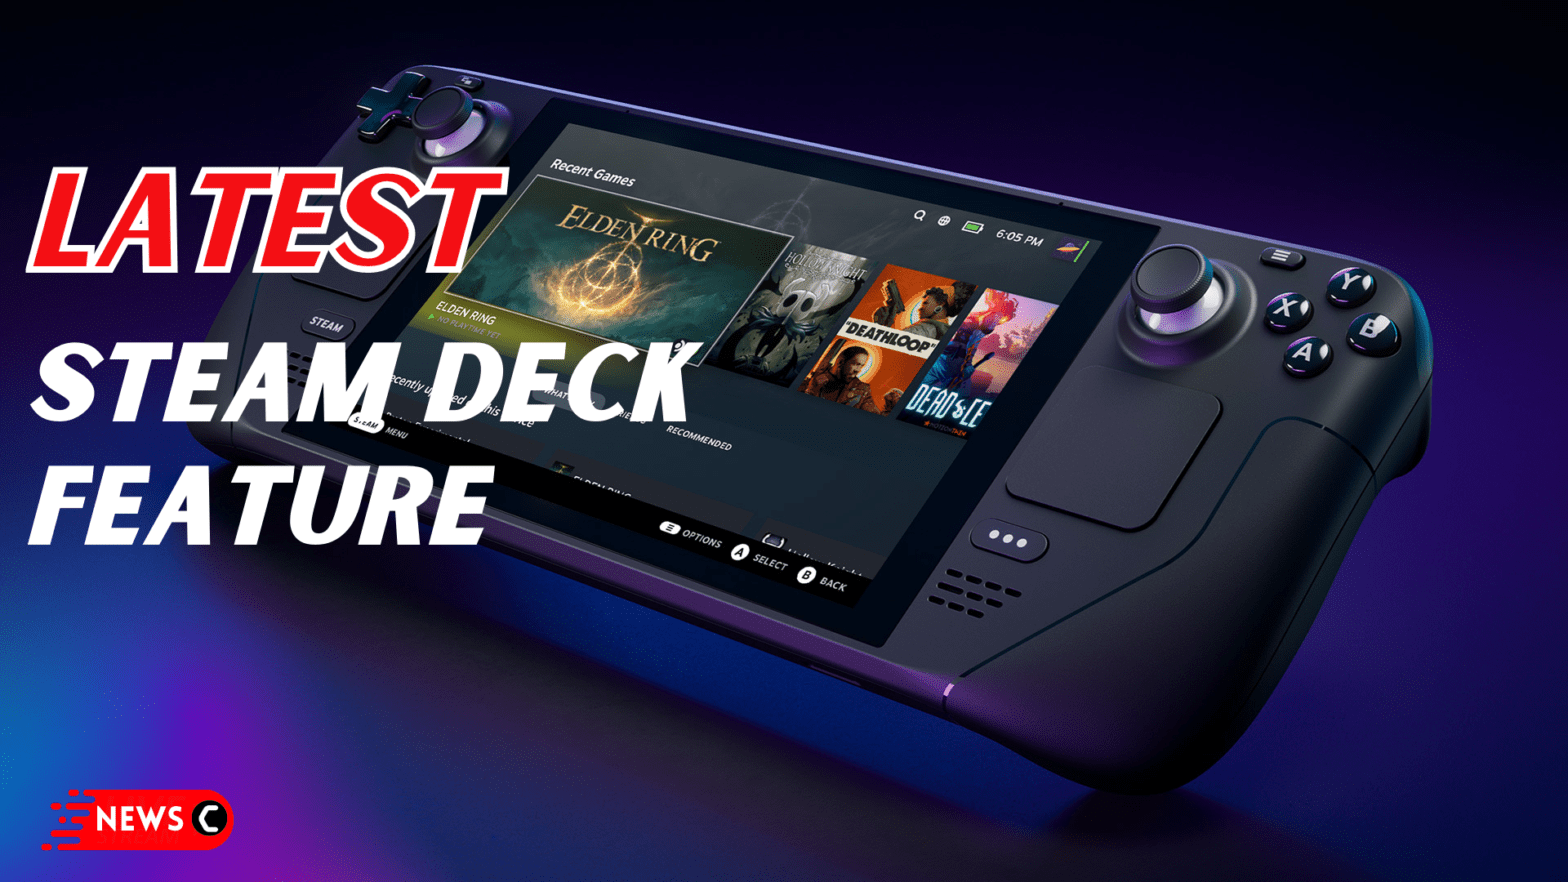 Steam Deck Will Not Heat AnyMore – But How?